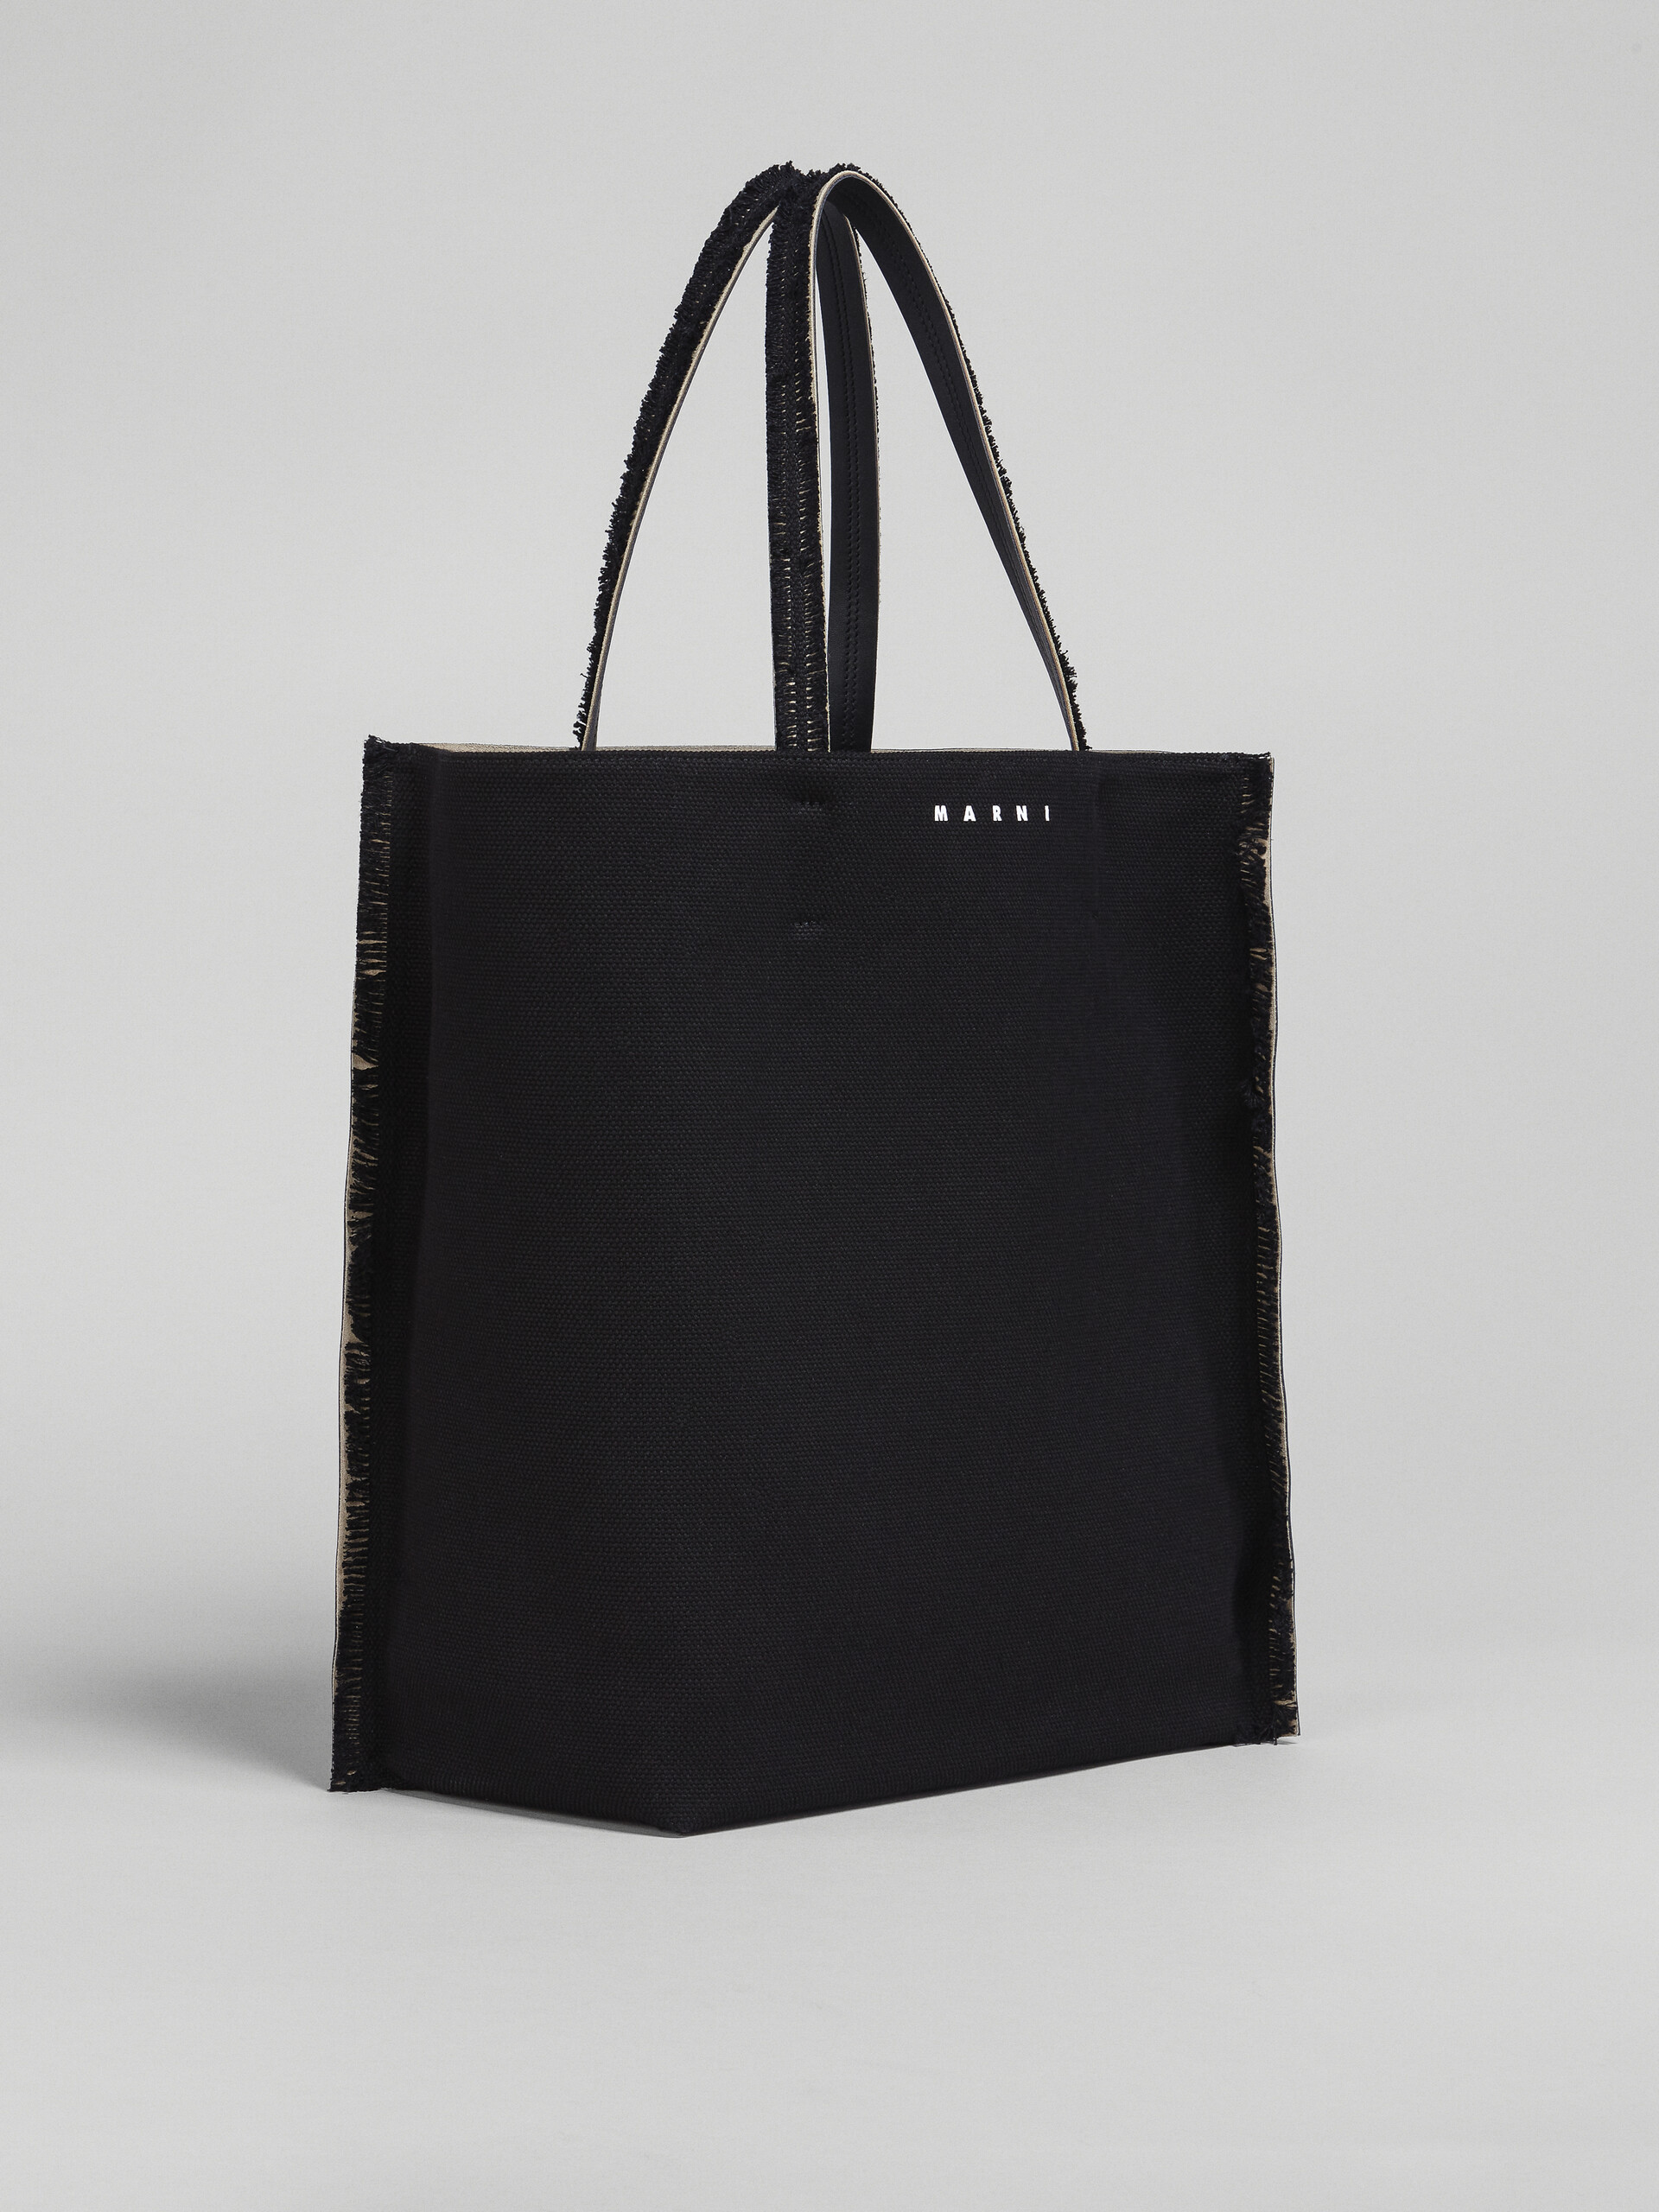 MUSEO SOFT large bag in black leather and canvas - Shopping Bags - Image 6